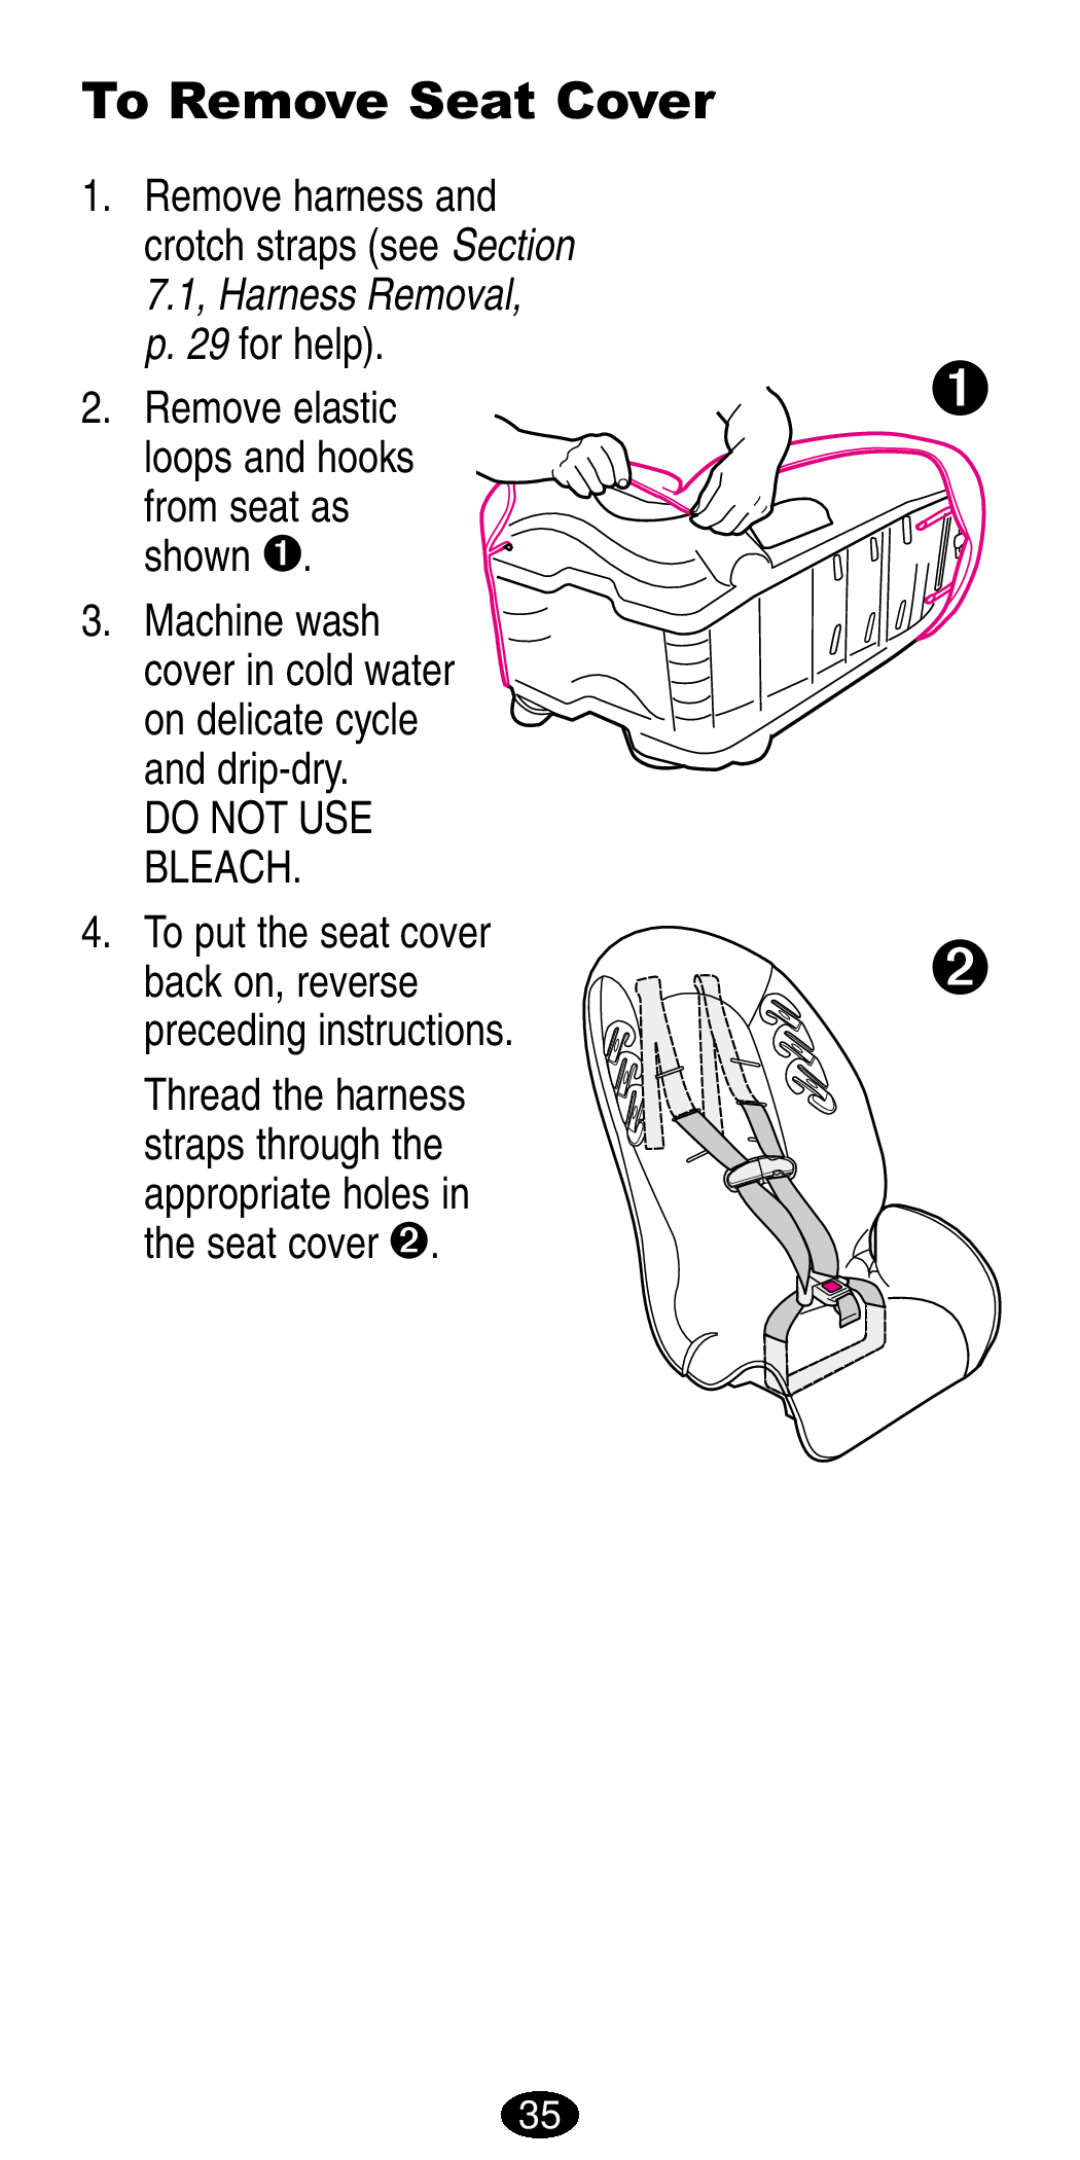 Graco 8486, 8490 manual To Remove Seat Cover, Remove elastic, preceding instructions, loops and hooks from seat as shown 